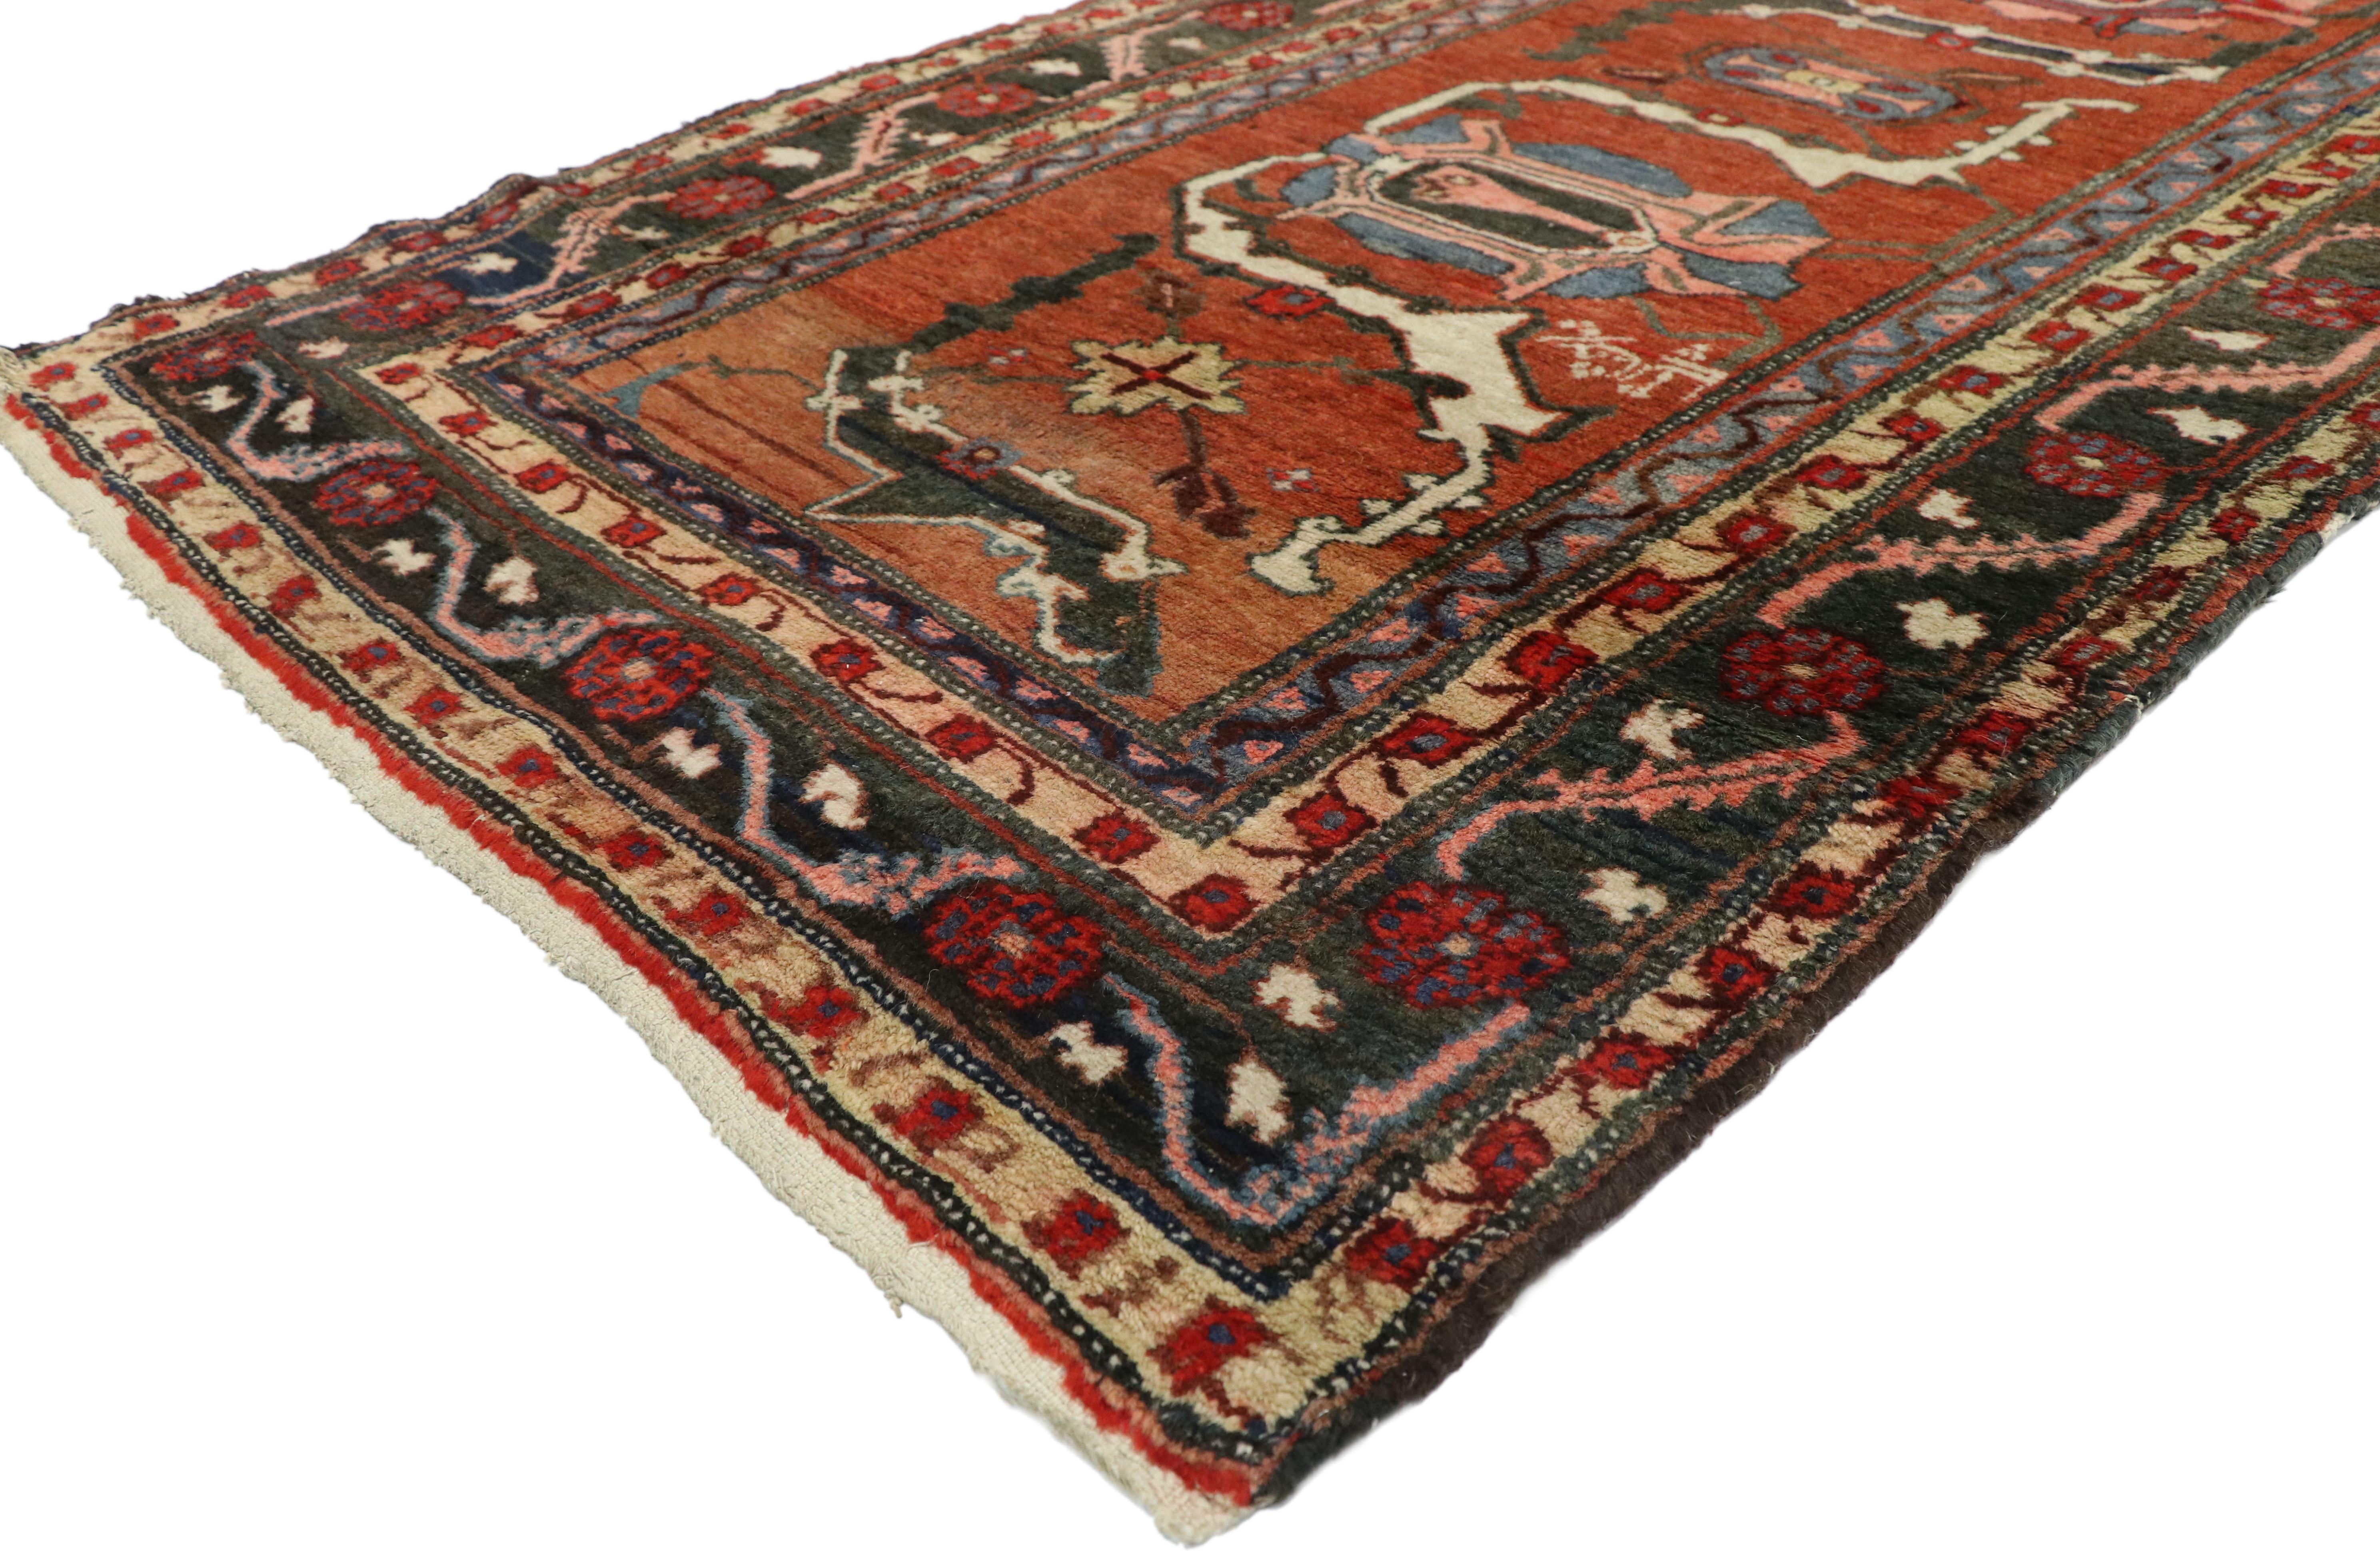 73248, distressed antique Persian Hamadan runner with Industrial Jacobean style. The harmony of time-softened colors combined with a large-scale meander palmette design in this distressed antique Persian Hamadan runner creates an unforgettable